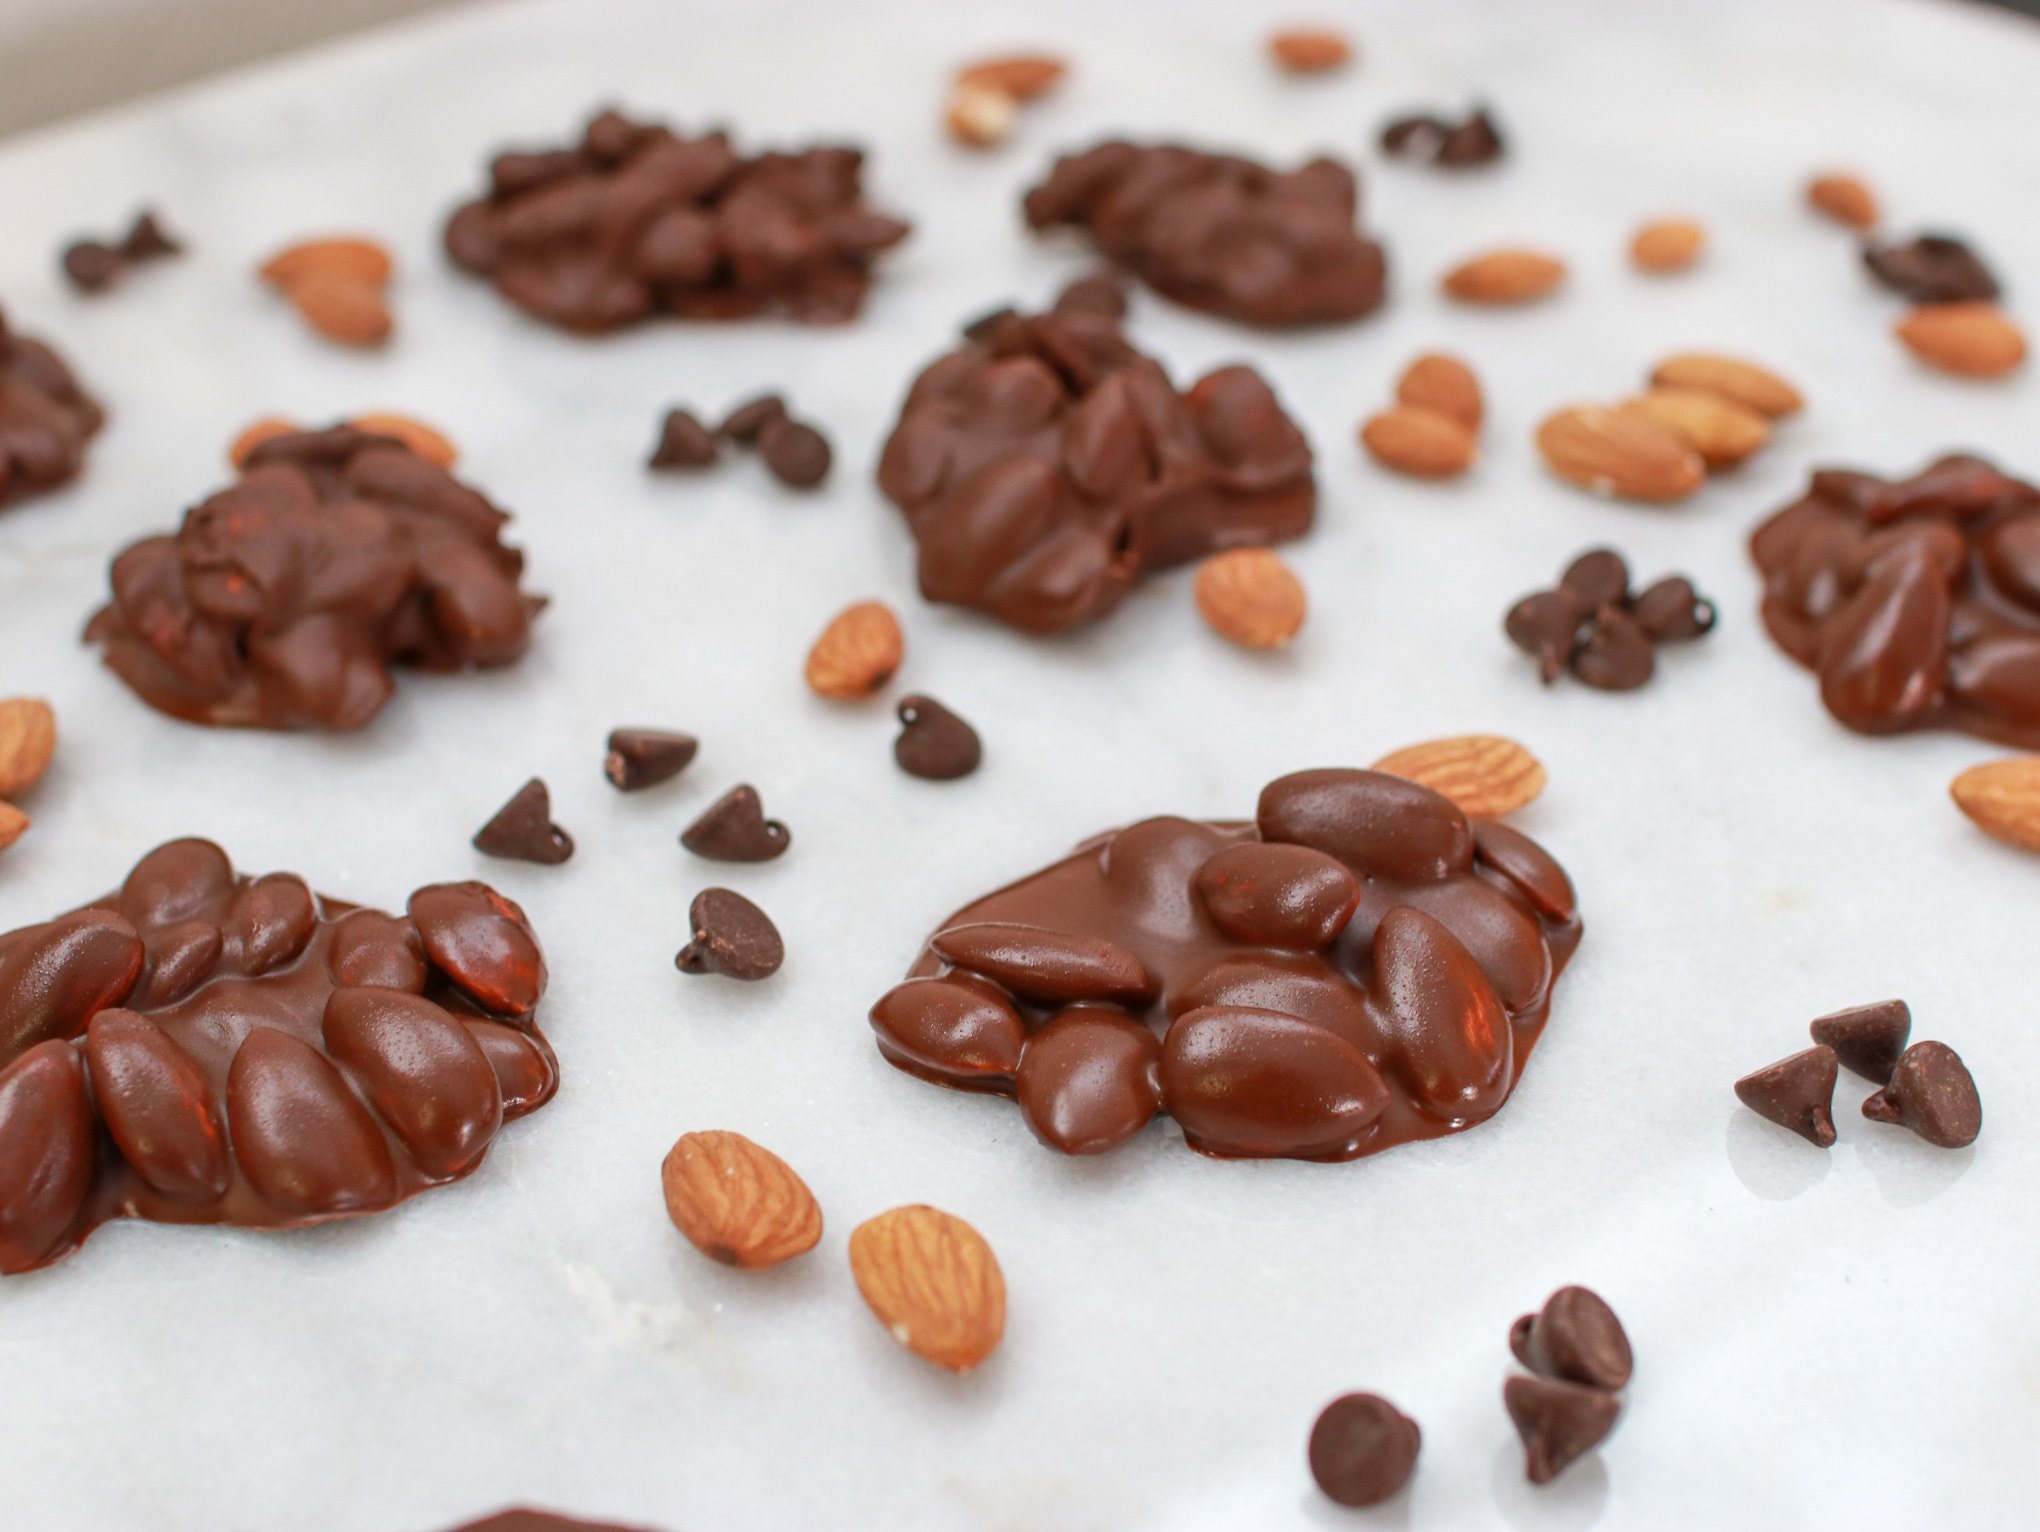 Are following keto?Do you love eating nuts? Orange County Blogger Debbie Savage is sharing her favorite crunchy yet delicious keto approved snack here! #WholeNaturalAlmonds #SimplyDelicious